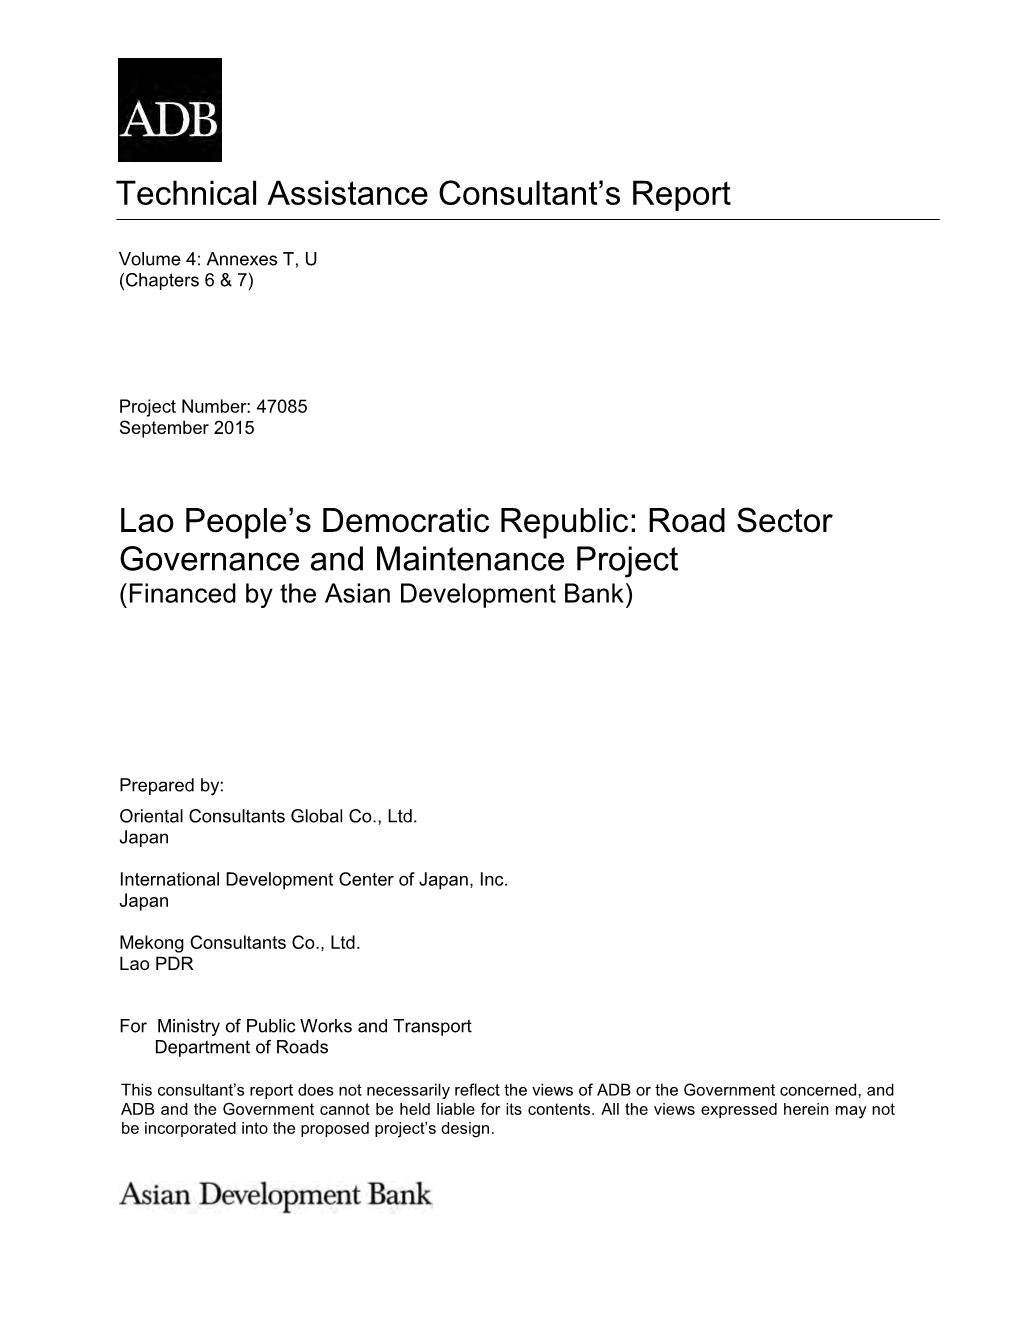 47085-001: Technical Assistance Consultant's Report